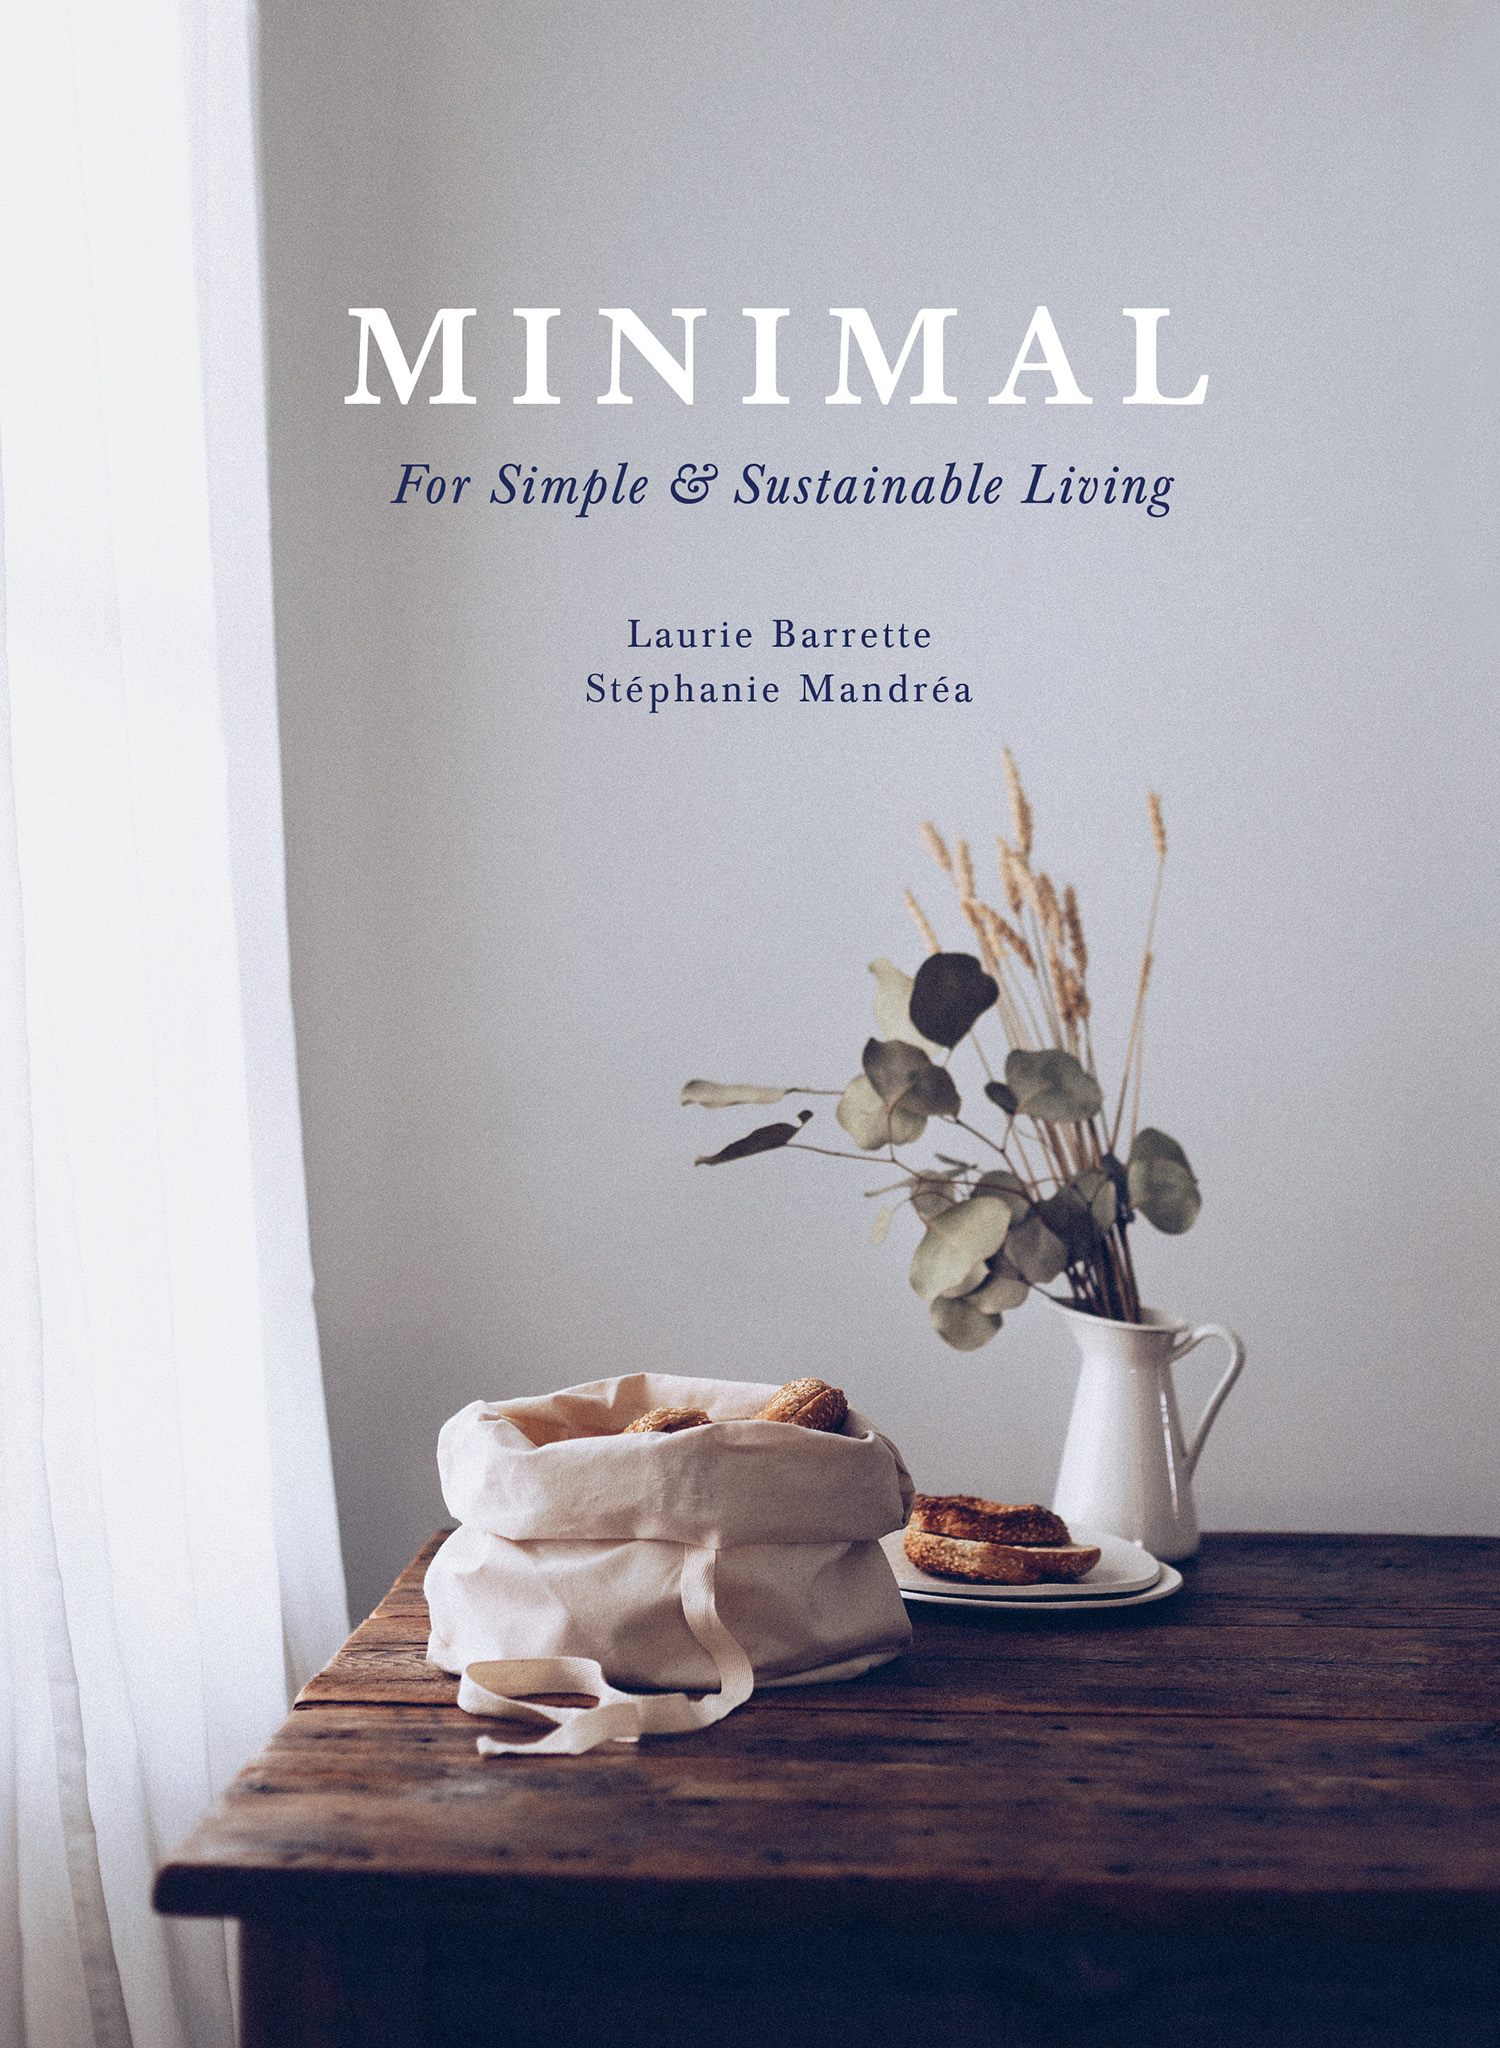 Contents Introduction The art of living Simple living Minimalism Zero waste - photo 1